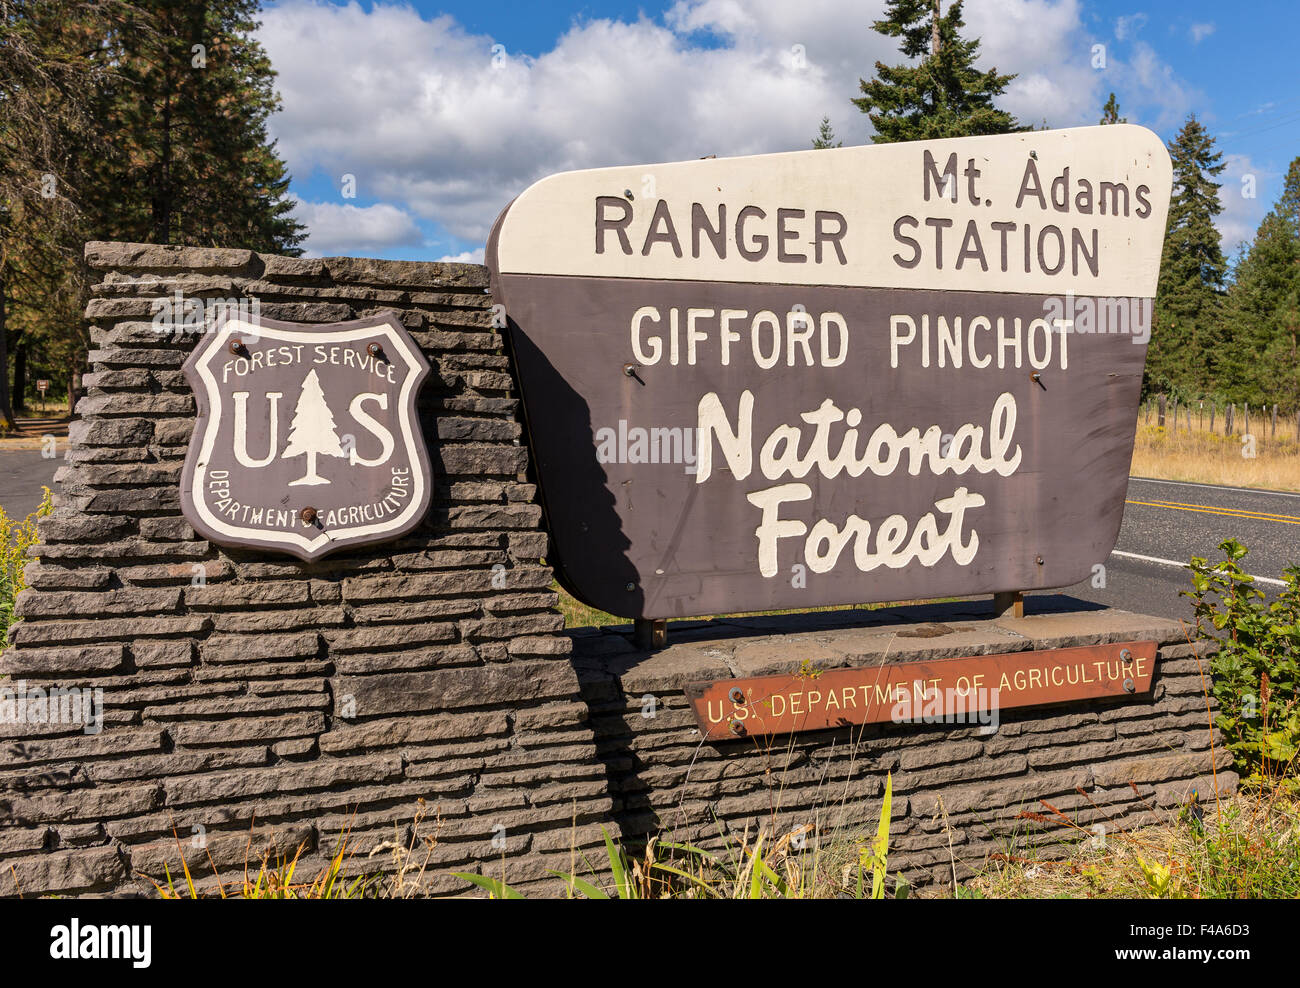 TROUT LAKE, Washington, USA - Mont Adams signe Ranger Station, Gifford Pinchot National Forest. Banque D'Images